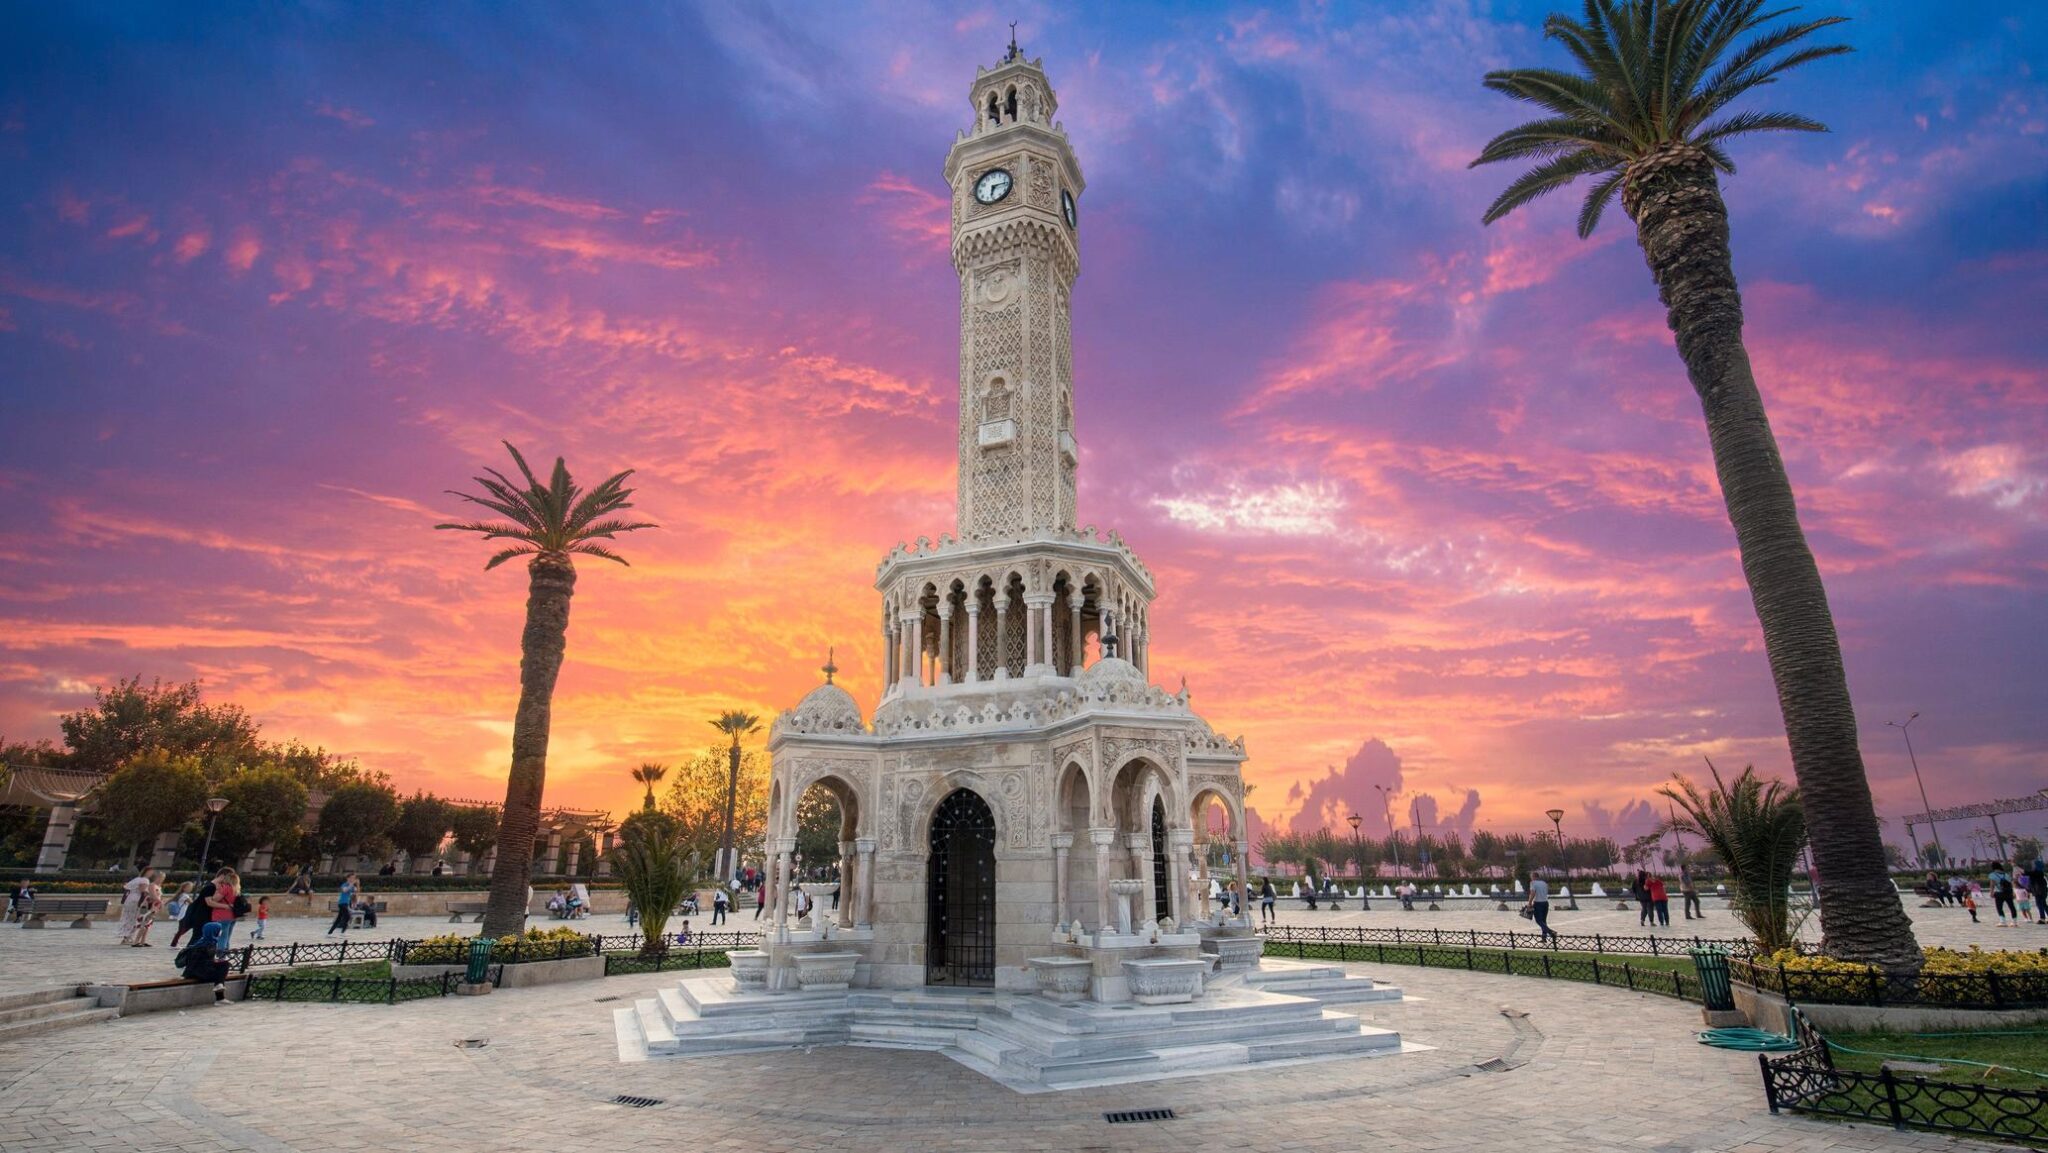 The Best 12 Places to Visit in Izmir for Tourists